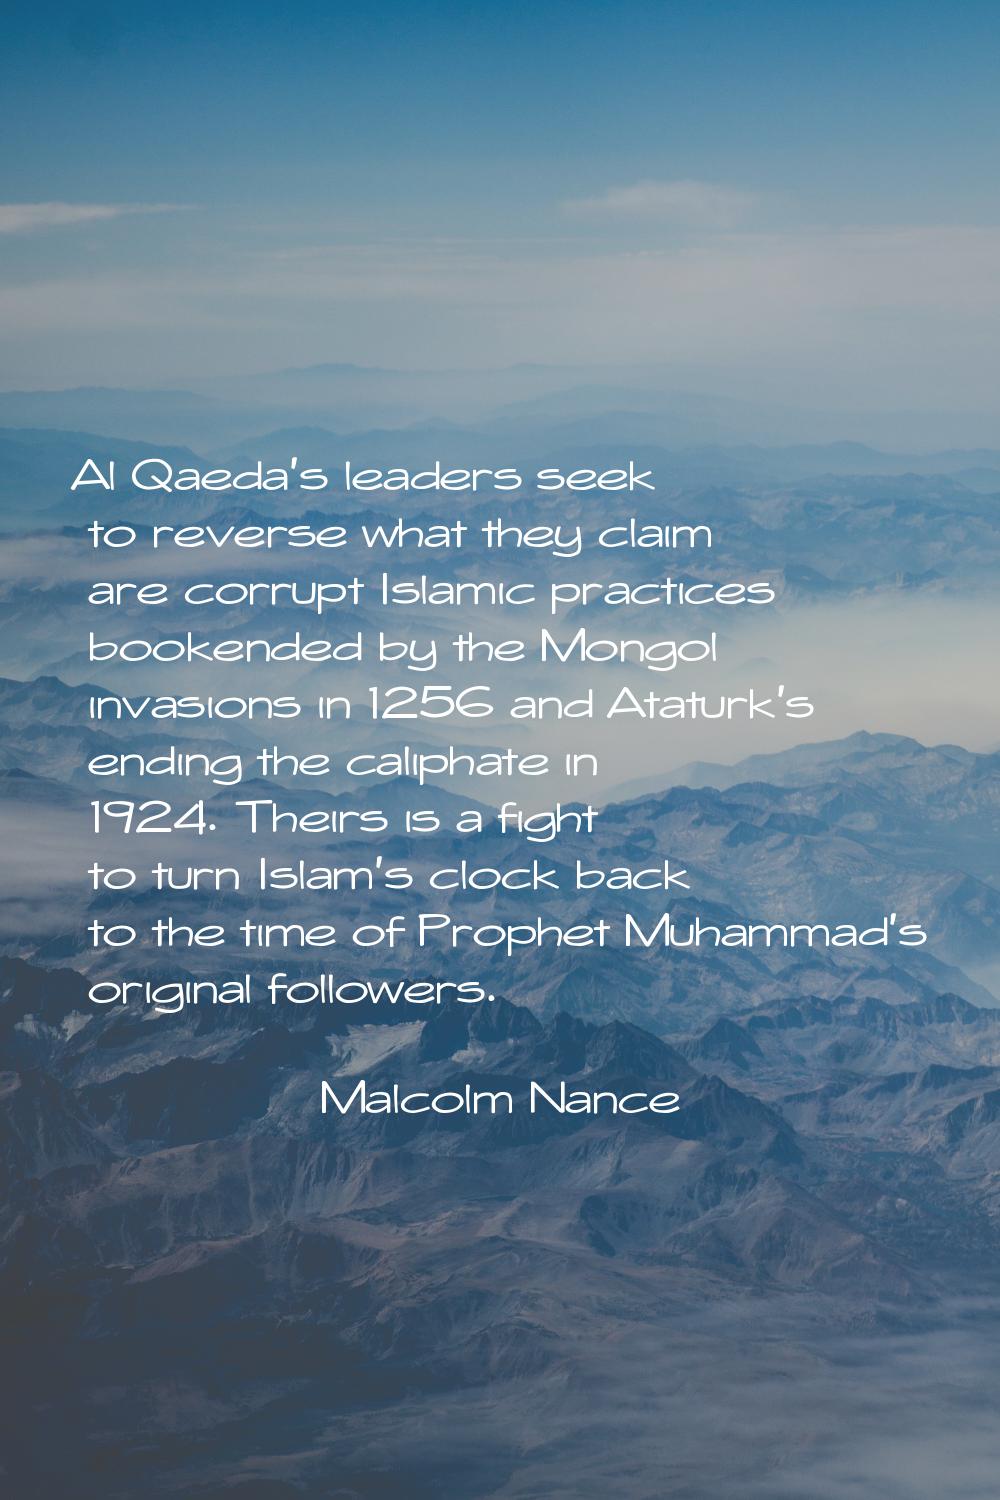 Al Qaeda's leaders seek to reverse what they claim are corrupt Islamic practices bookended by the M